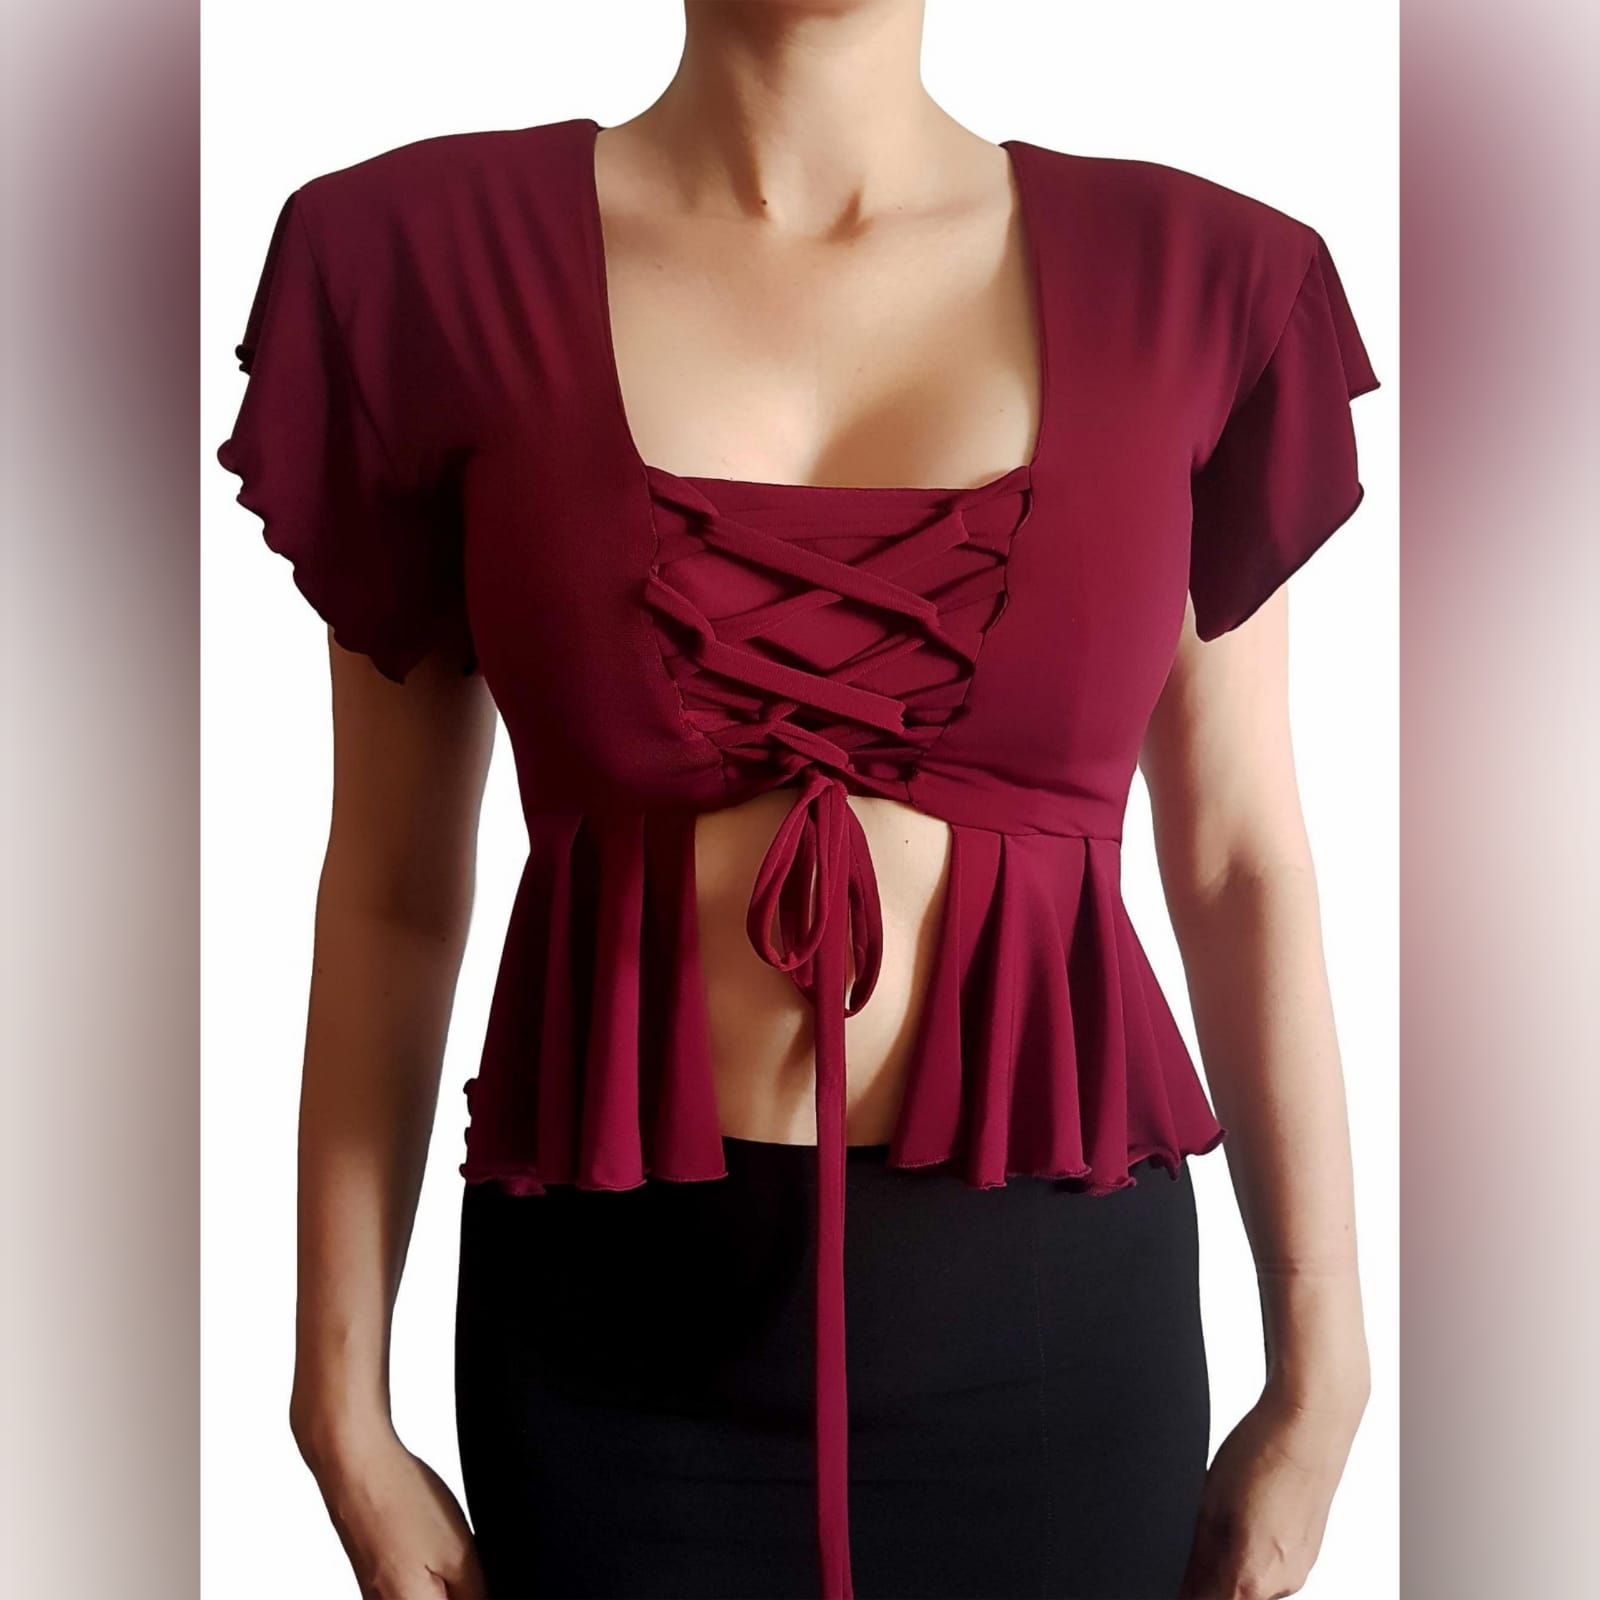 Maroon sexy casual top high waist peplum 2 maroon sexy casual top, with a high waist peplum. Lace-up detail in the front to adjust fit. This elegant top has dramatic shoulders which adds a touch of couture to the look. Handmade top, unique look, and a special piece that you can add to your wardrobe. We offer this high shoulder top in several colours.